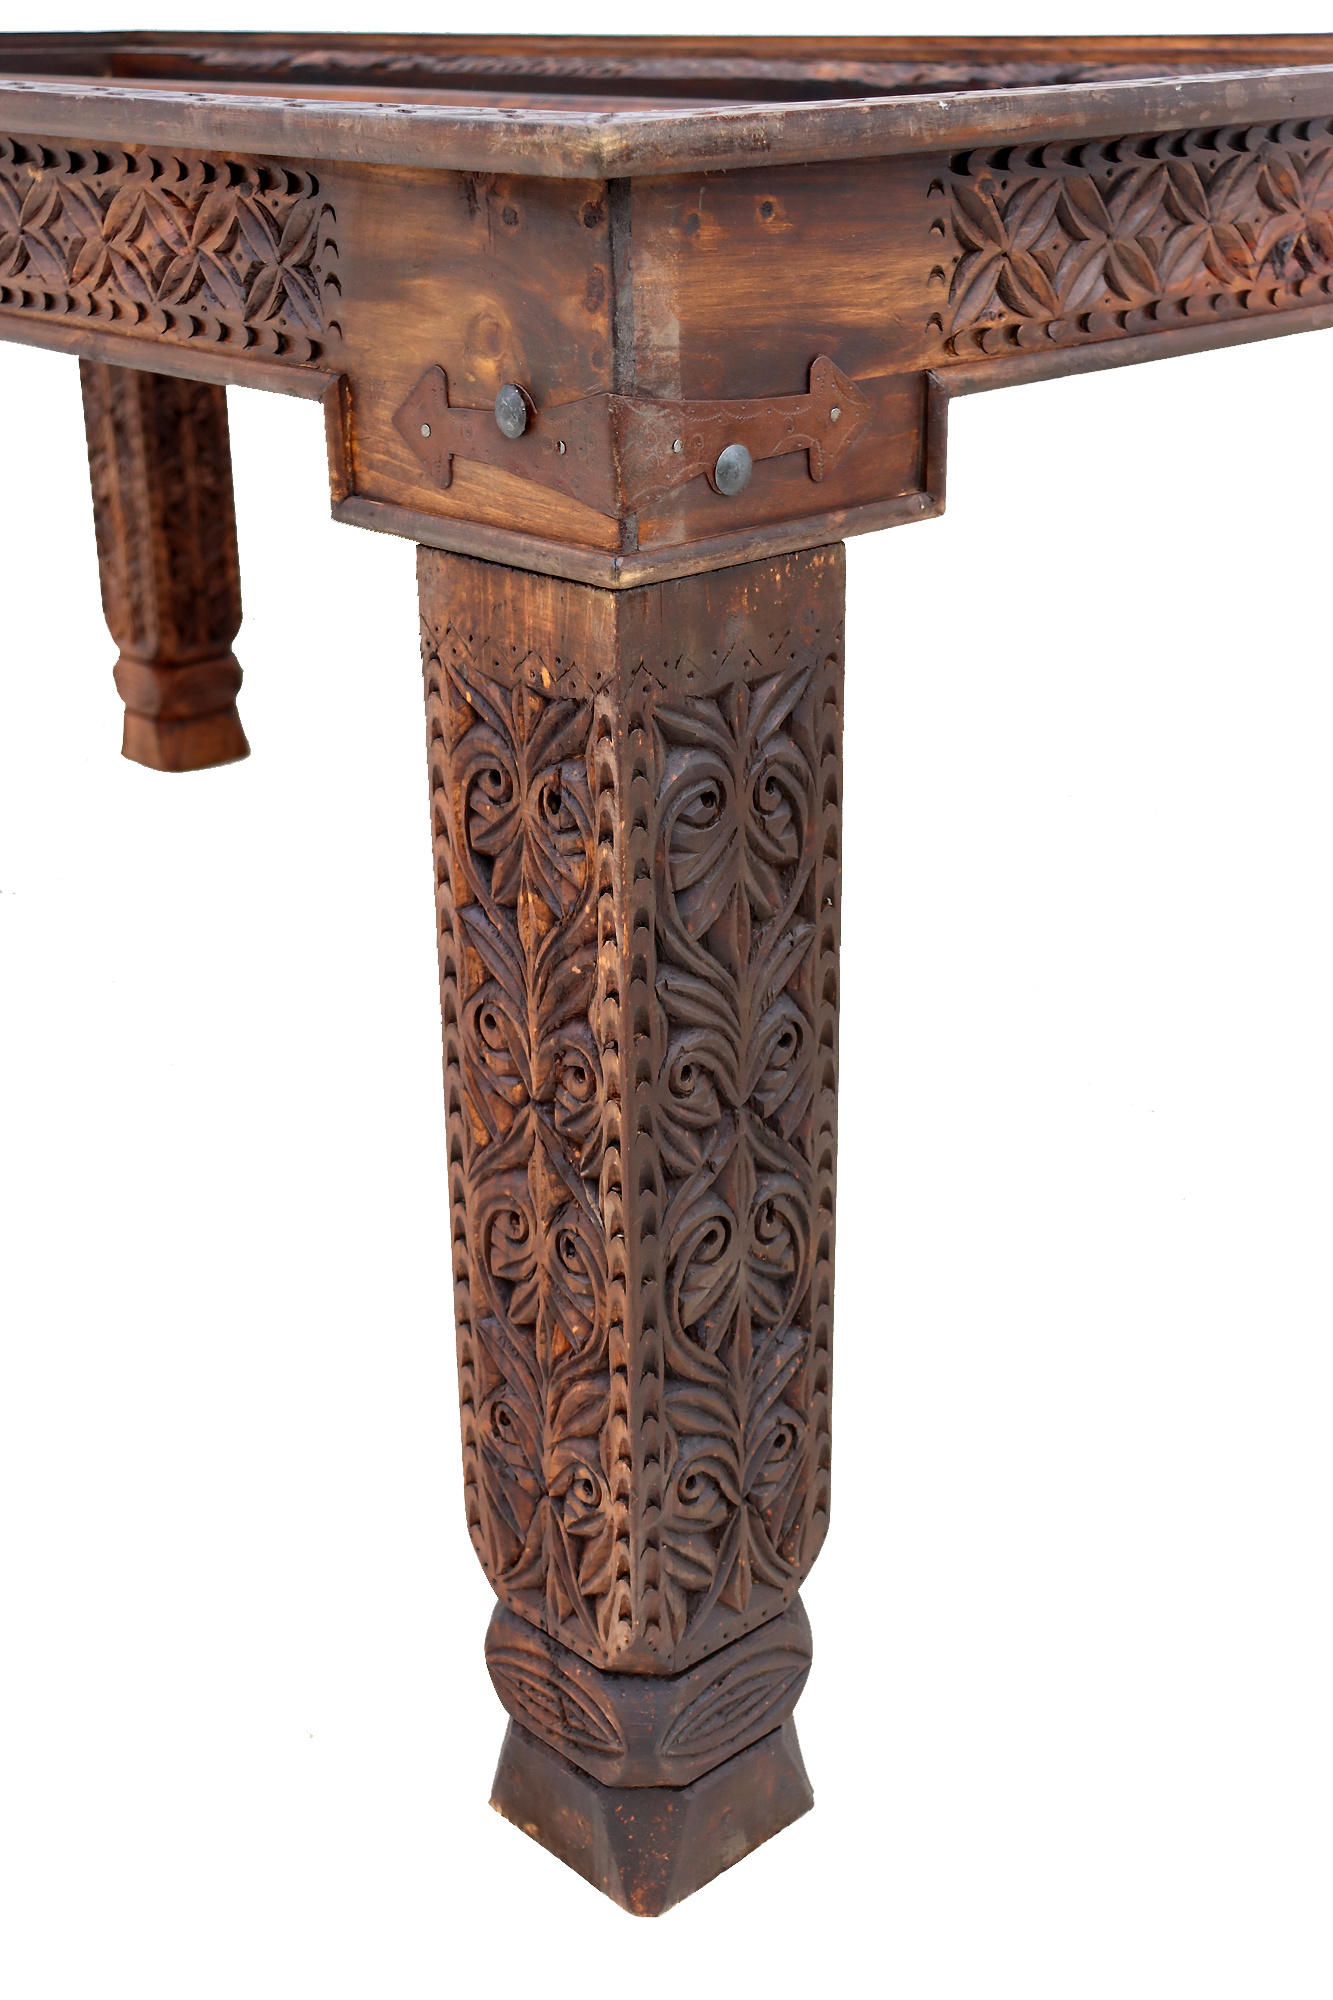 190x100 cm cm exclusive antique-look orient colonial solid wood hand-carved  kitchen table dining table desk from Afghanistan nuristan 23-PJ